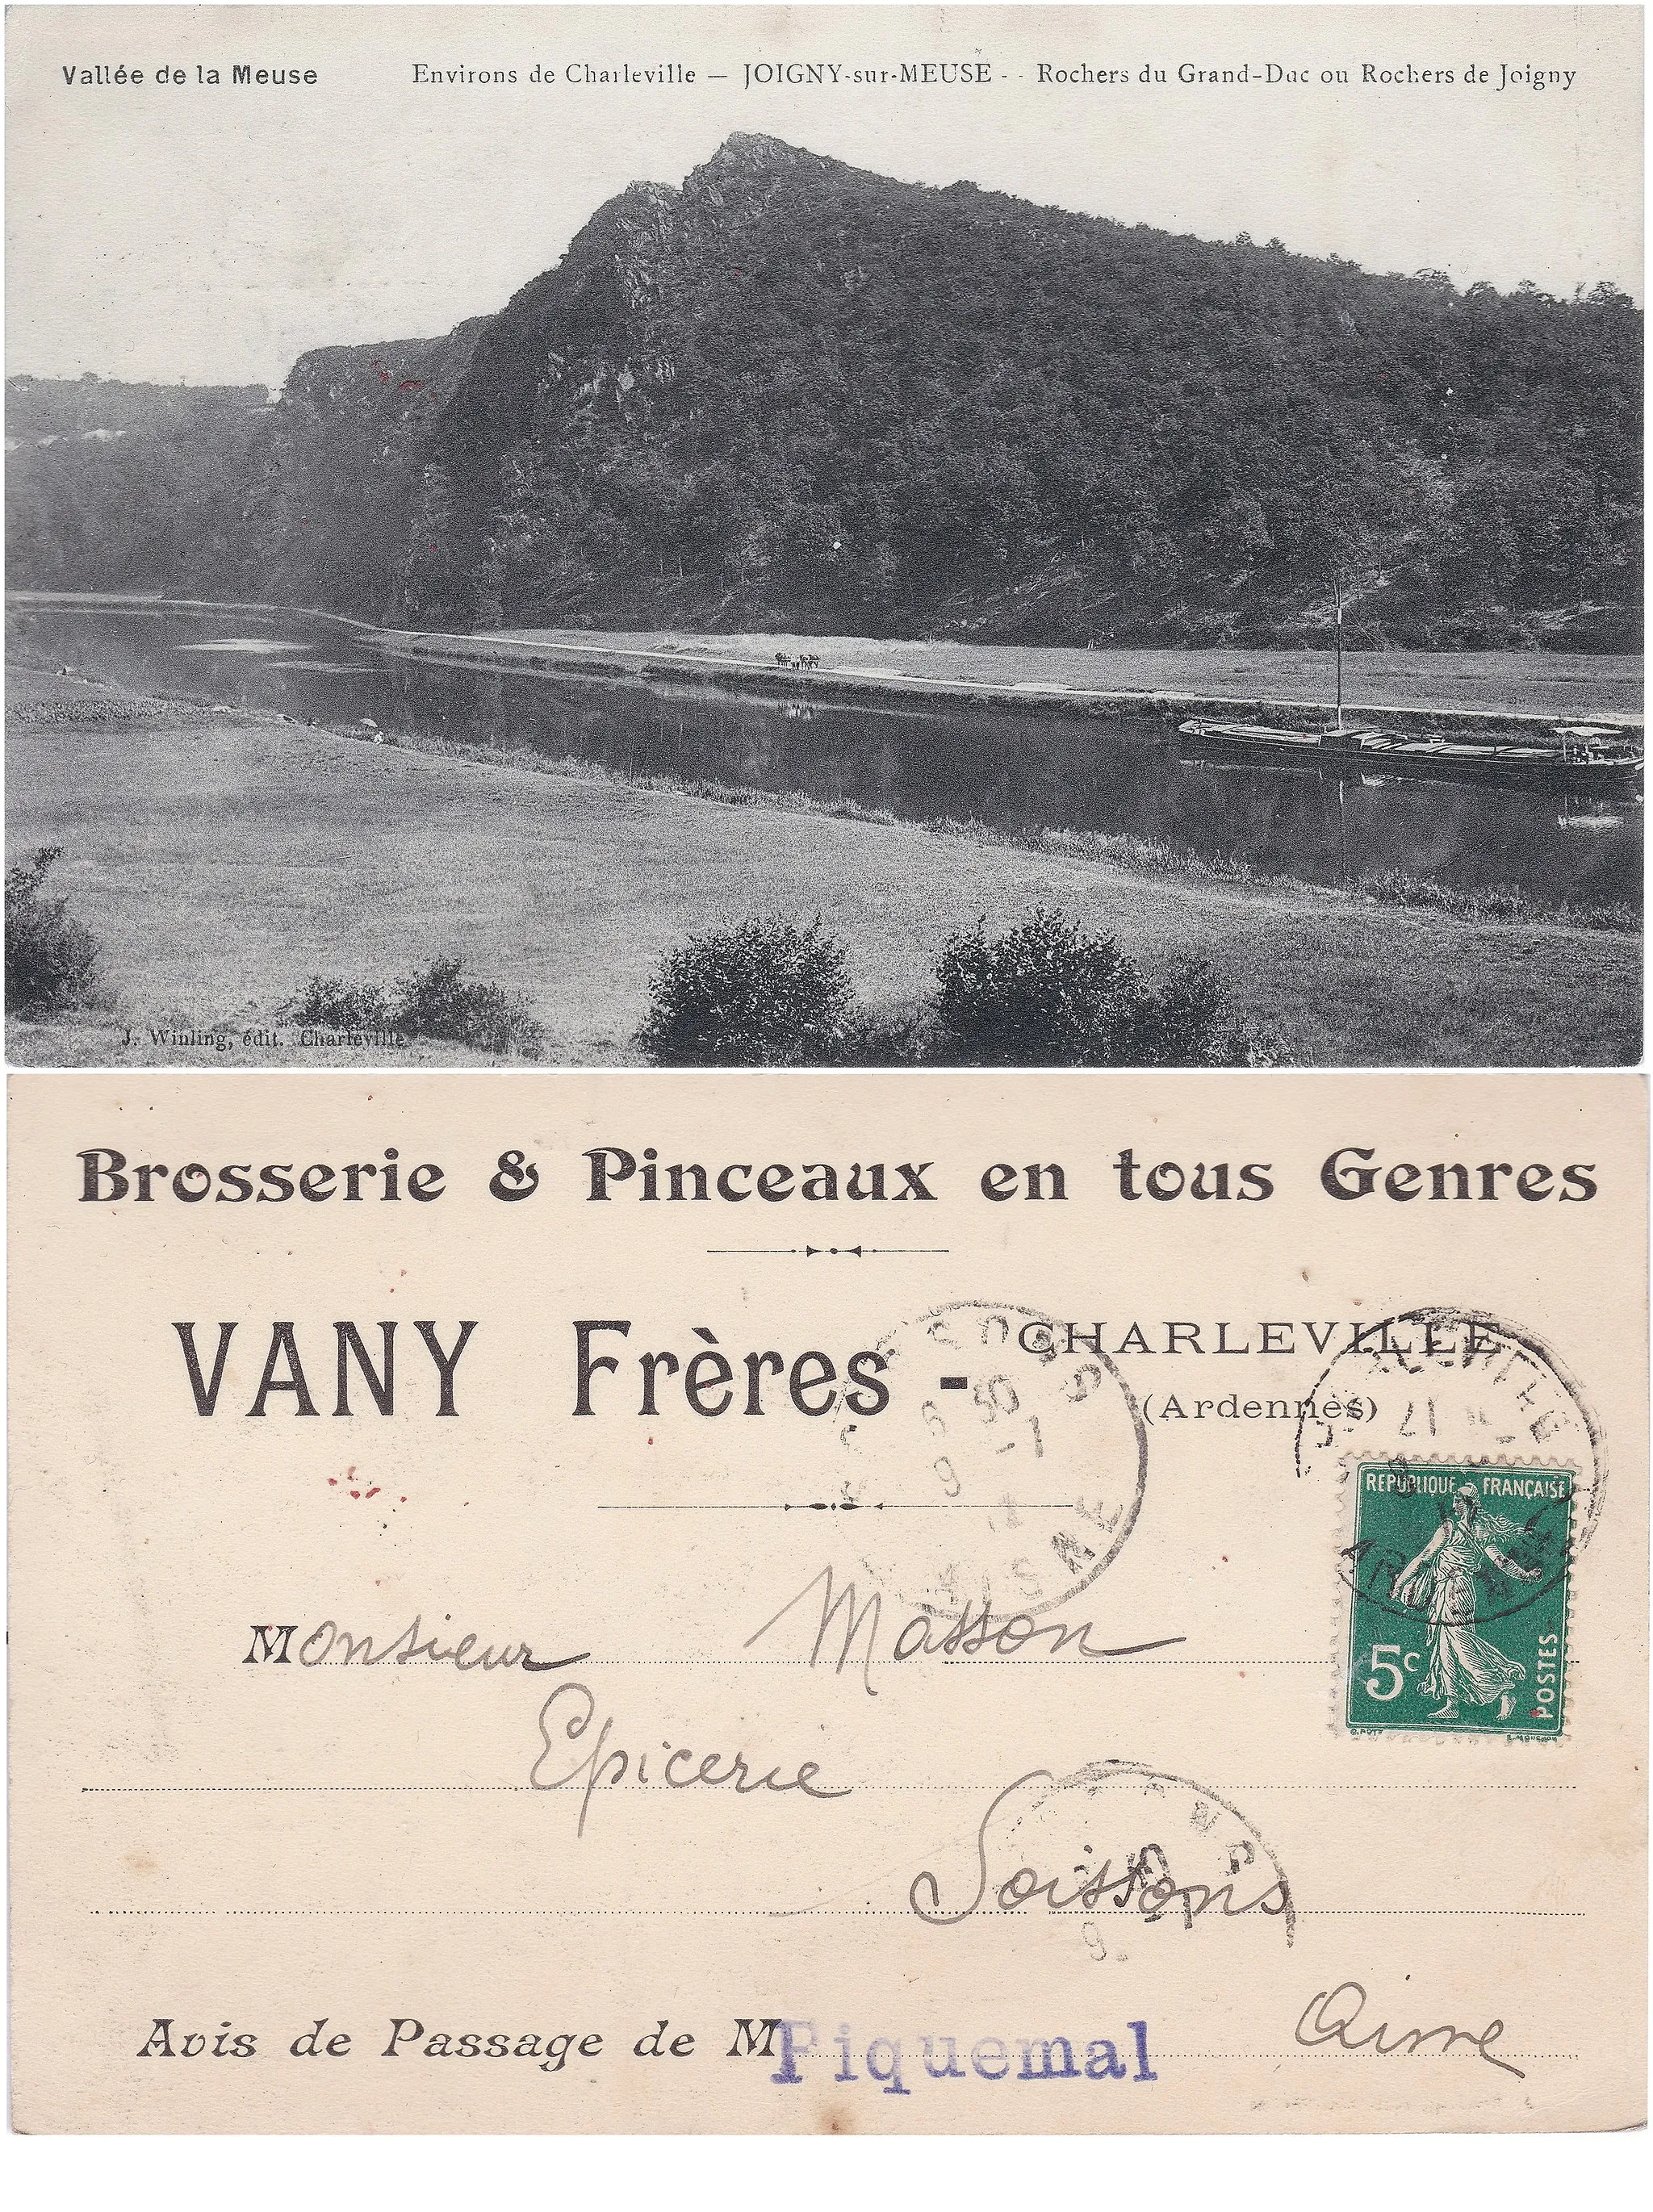 Photo showing: Joigny-Sur-Meuse (France, Ardennes department) - View on the rocks of Joigny and on the Meuse river north of Charleville-Mézières - Horse-Drawn Barge.